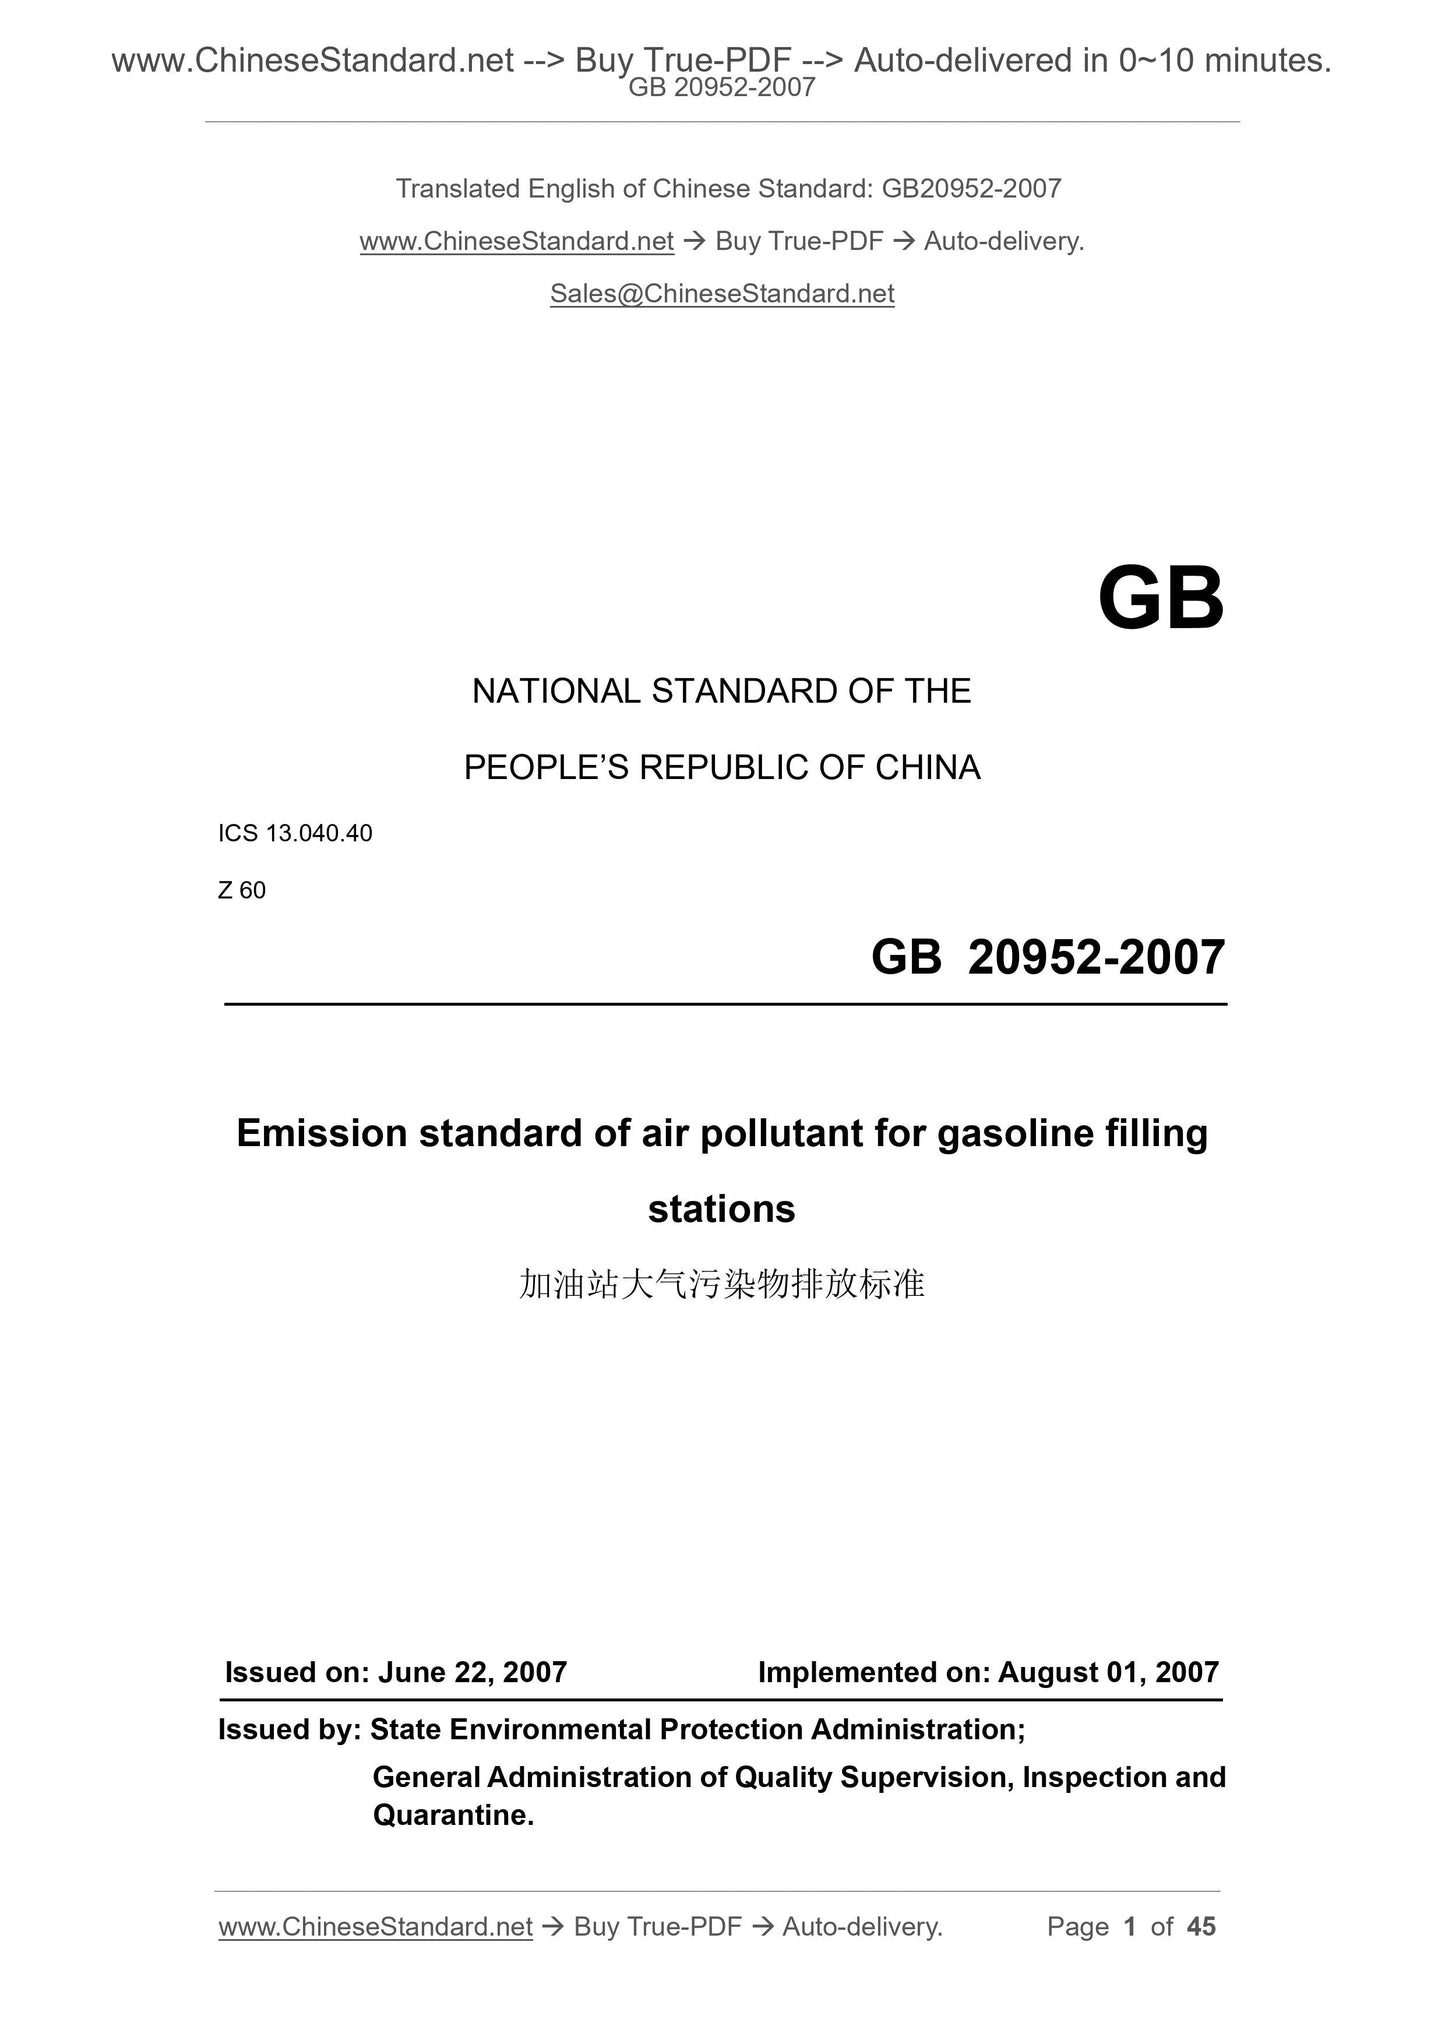 GB 20952-2007 Page 1